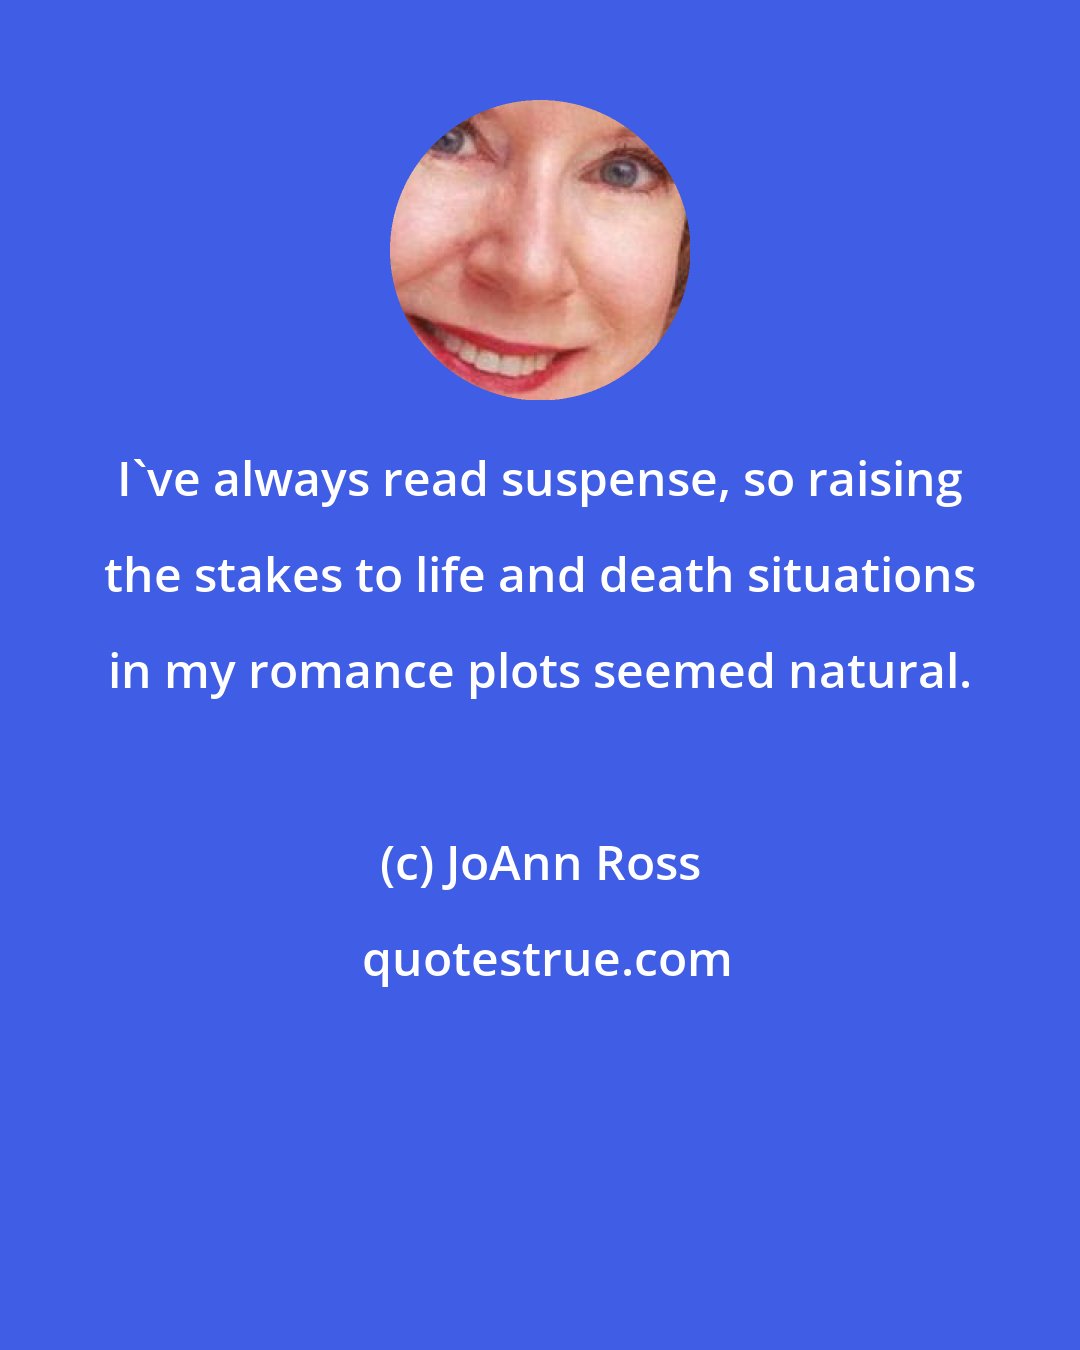 JoAnn Ross: I've always read suspense, so raising the stakes to life and death situations in my romance plots seemed natural.